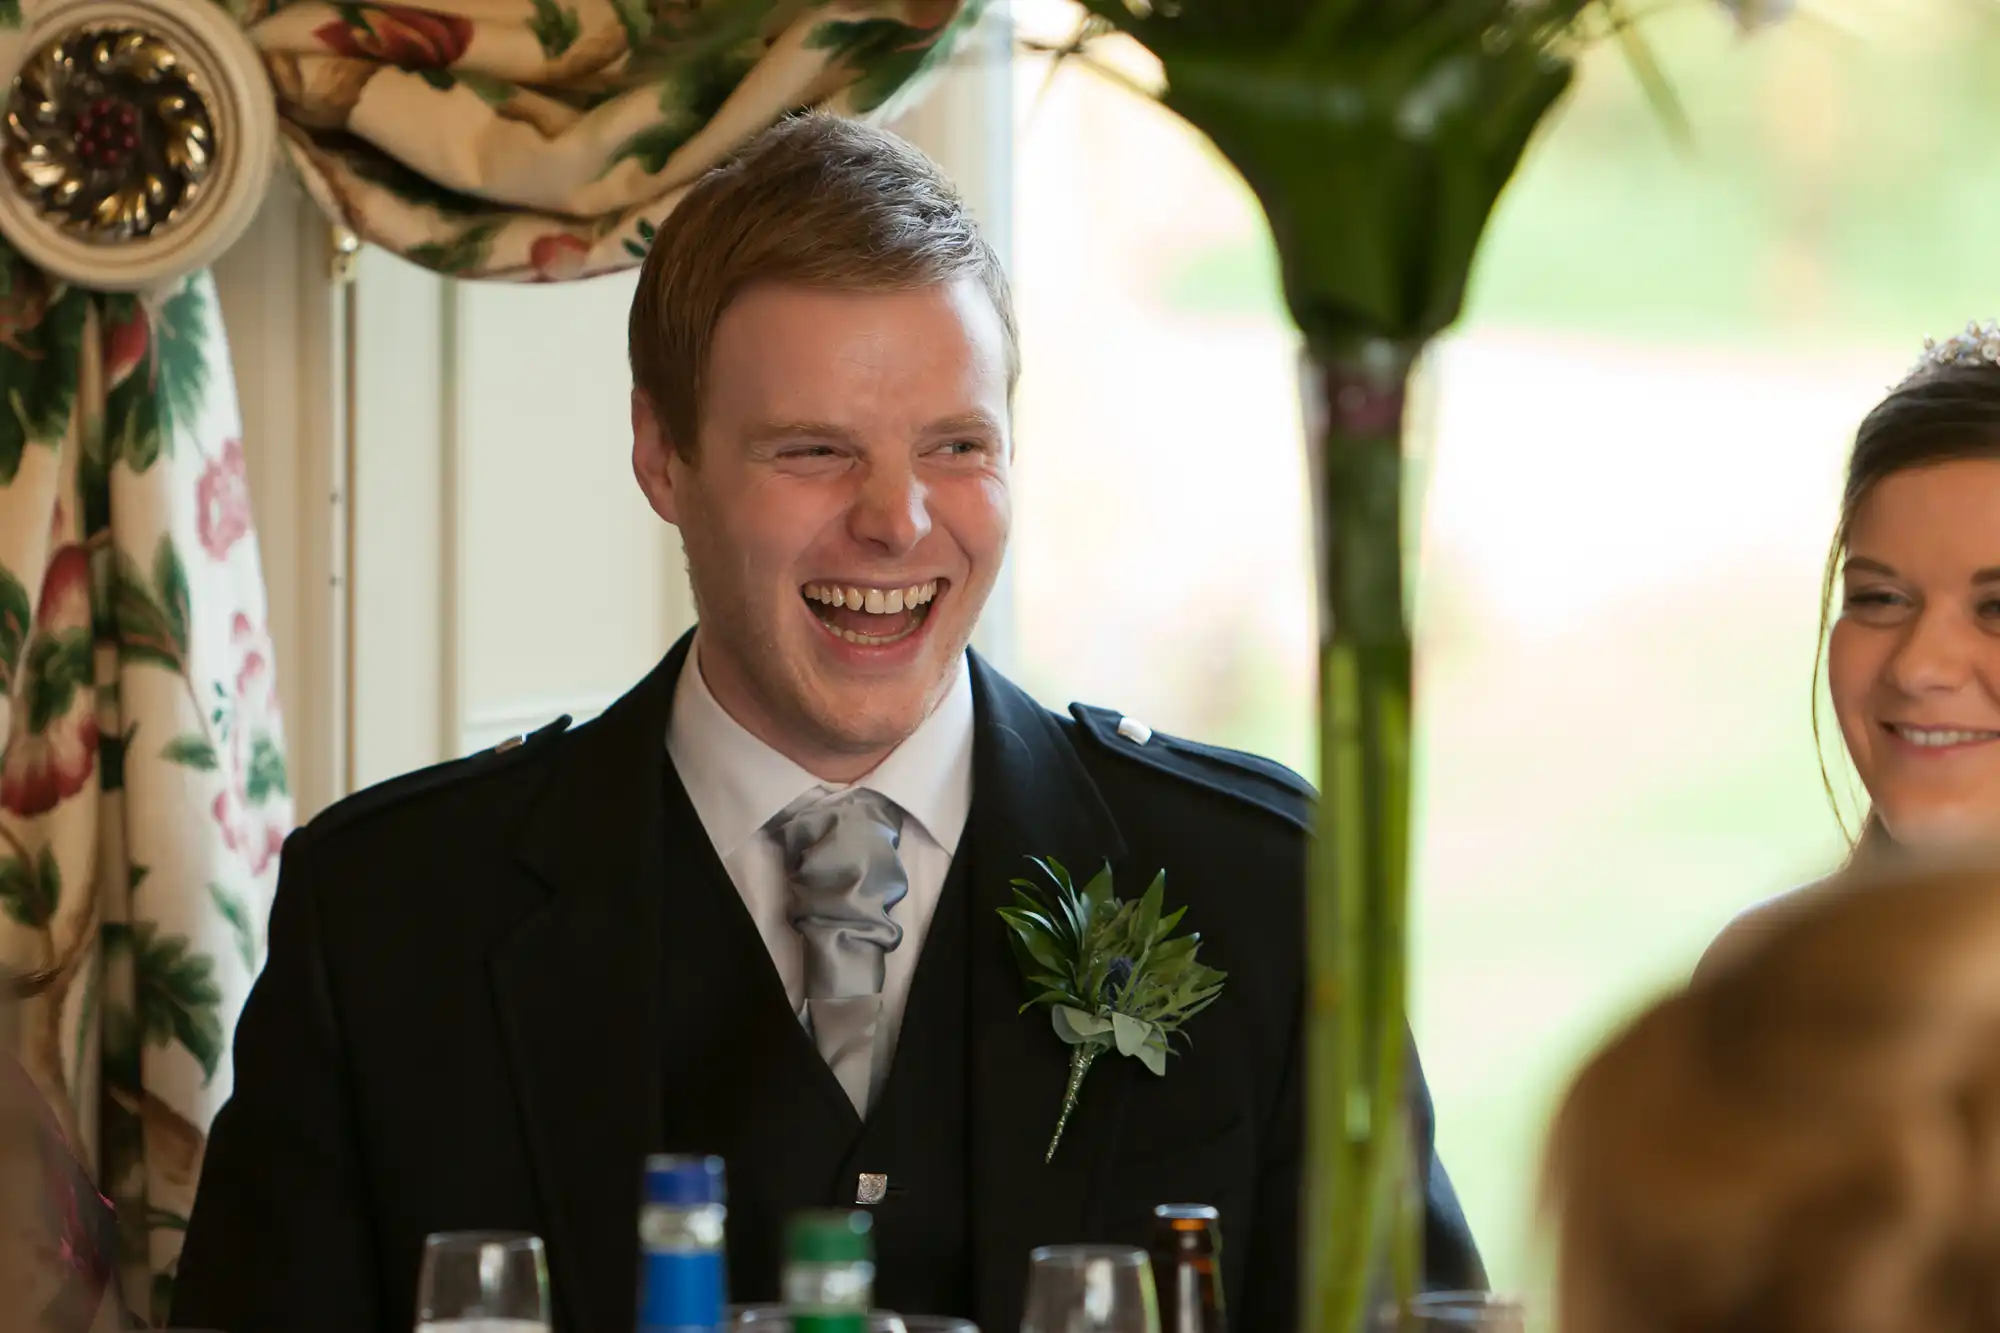 Man in a suit laughing joyously at a formal event, with a woman smiling beside him.